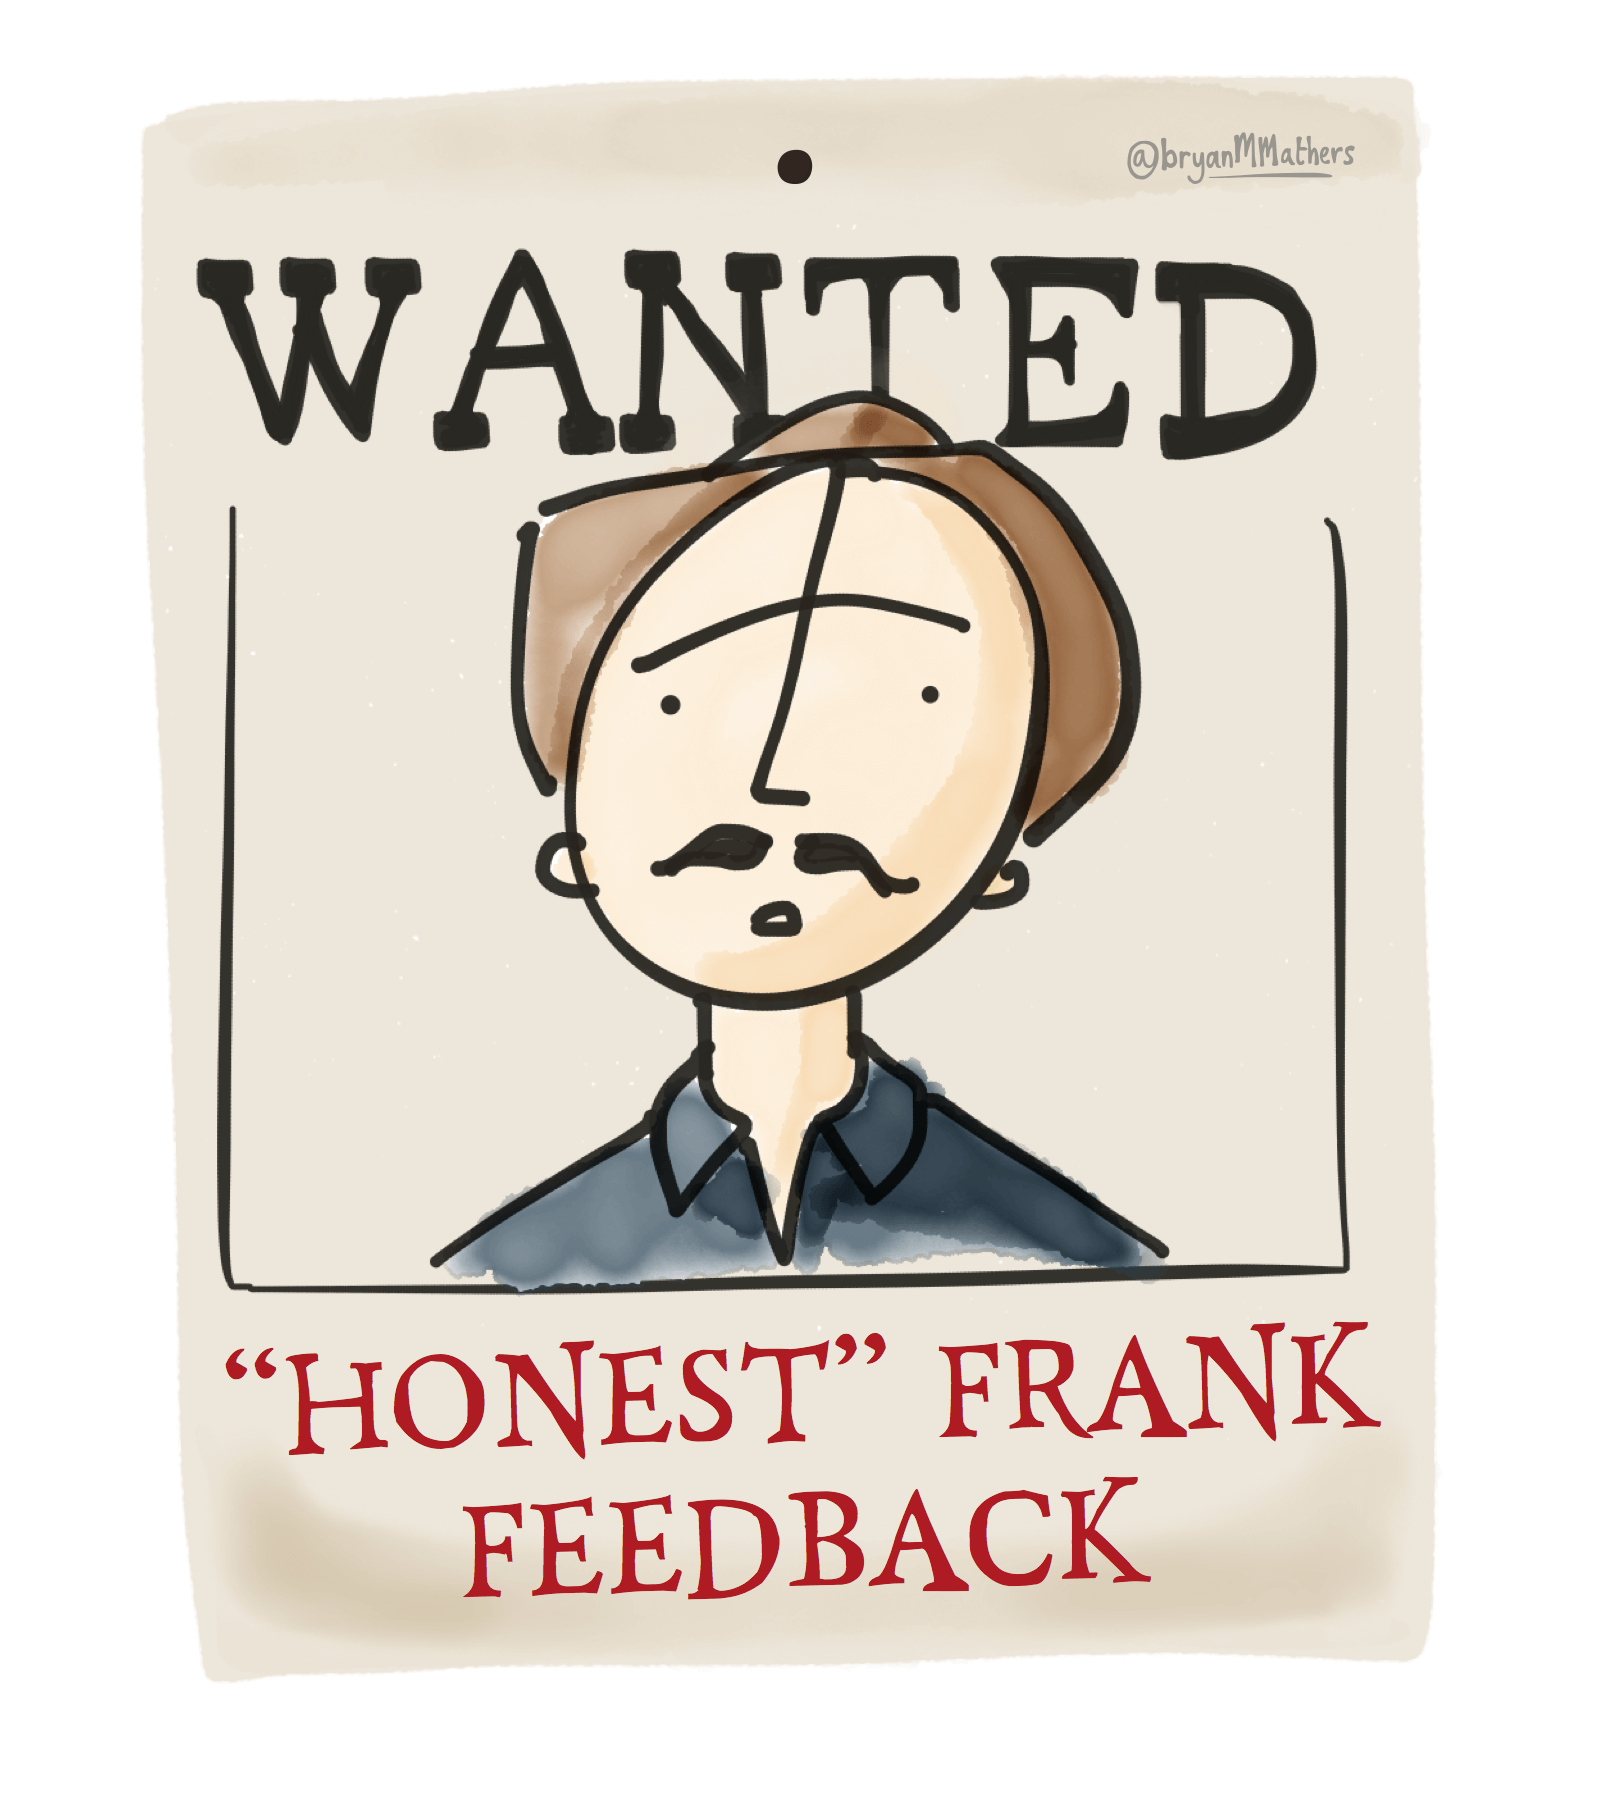 WANTED (DEAD OR ALIVE) HONEST FRANK FEEDBACK To improve your CV you want honest frank feedback on it. Frank Feedback (and his sister Francesca Feedback) aren’t judging you, they are judging your CV. Honest feedback will see beyond good or bad and will tell you where you can improve, not just in what you’ve presented but also what’s missing and what you need to focus on in the future to continue your professional development (CPD). So, who are the people you could ask for honest feedback? Can you return their favour and give them some feedback on theirs? WANTED: Honest Frank Feedback artwork by Visual Thinkery is licensed under CC-BY-ND